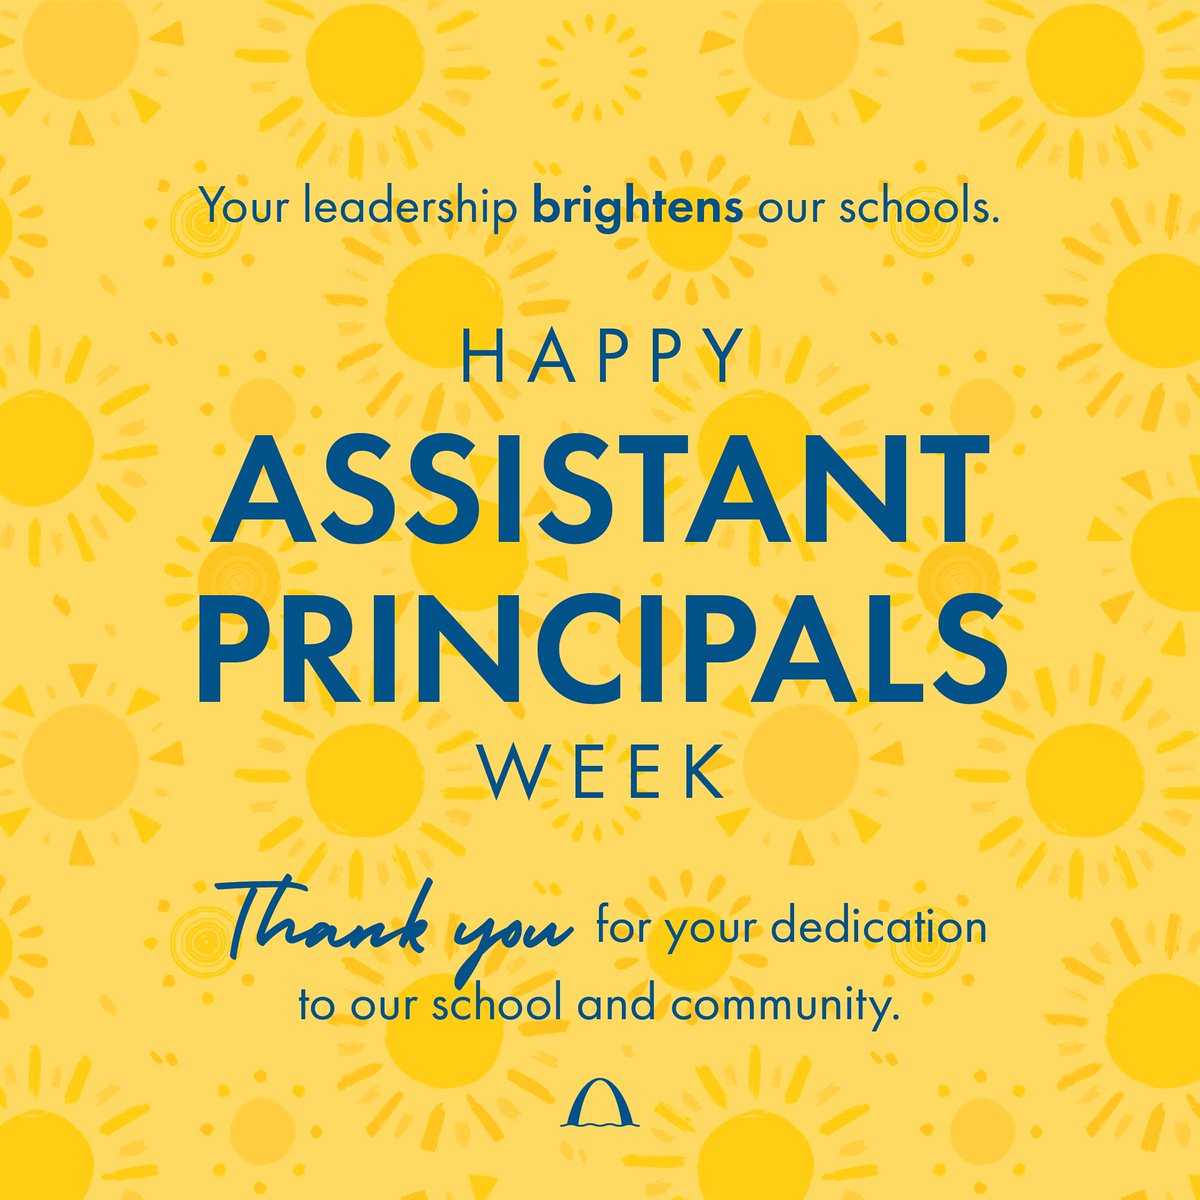 You are the glue in so many of our school communities! We appreciate you beyond words!